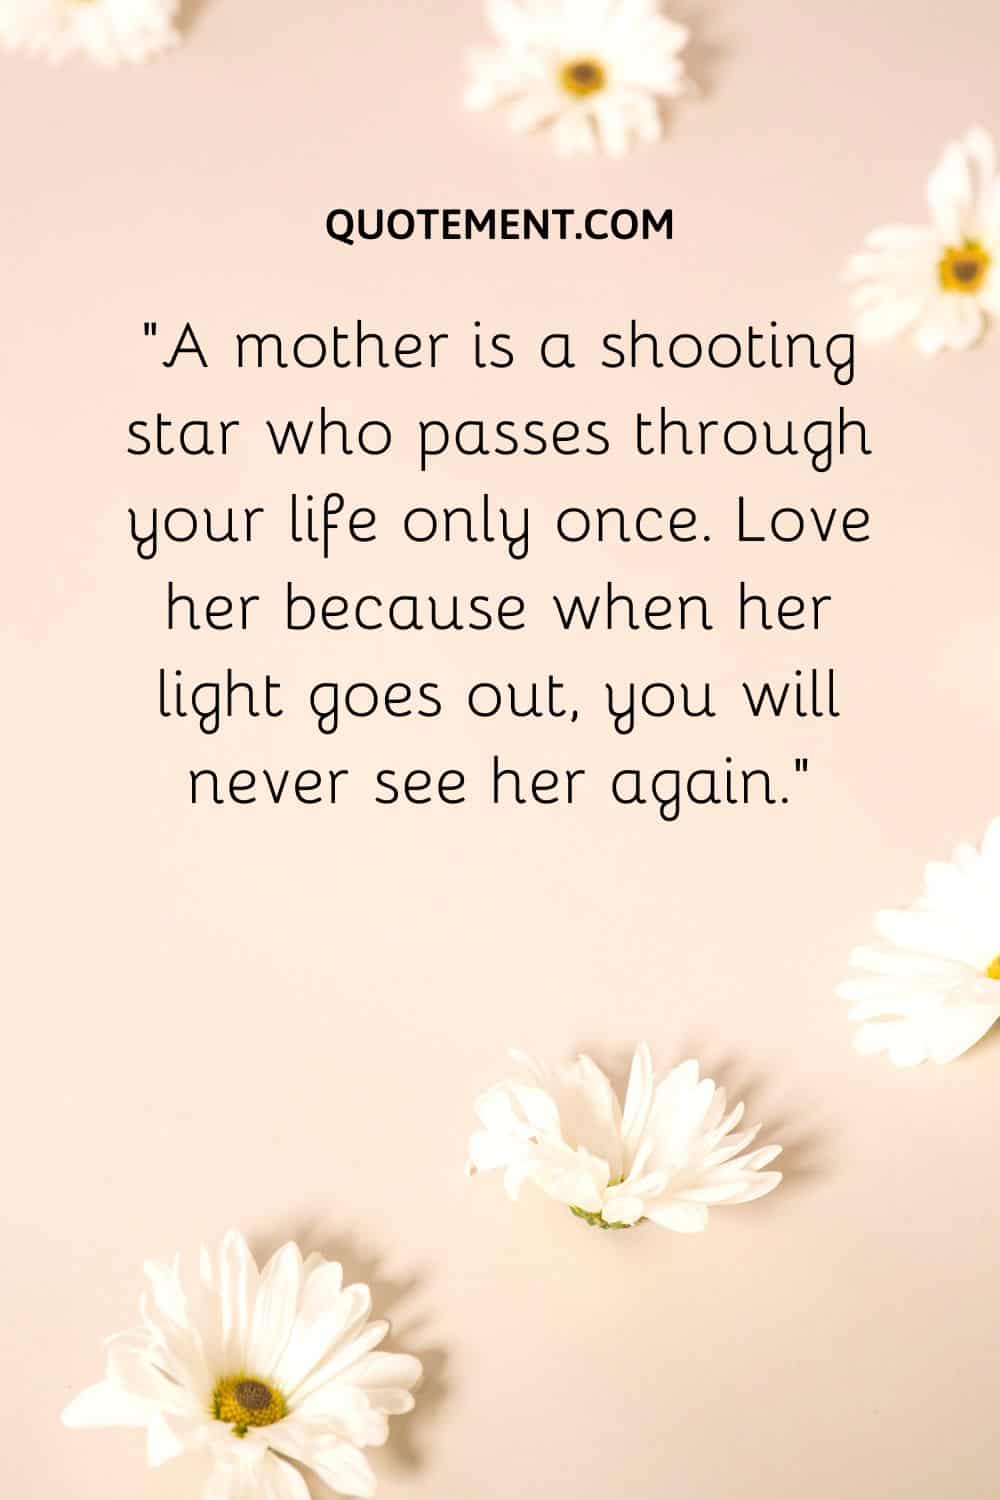 A mother is a shooting star who passes through your life only once.